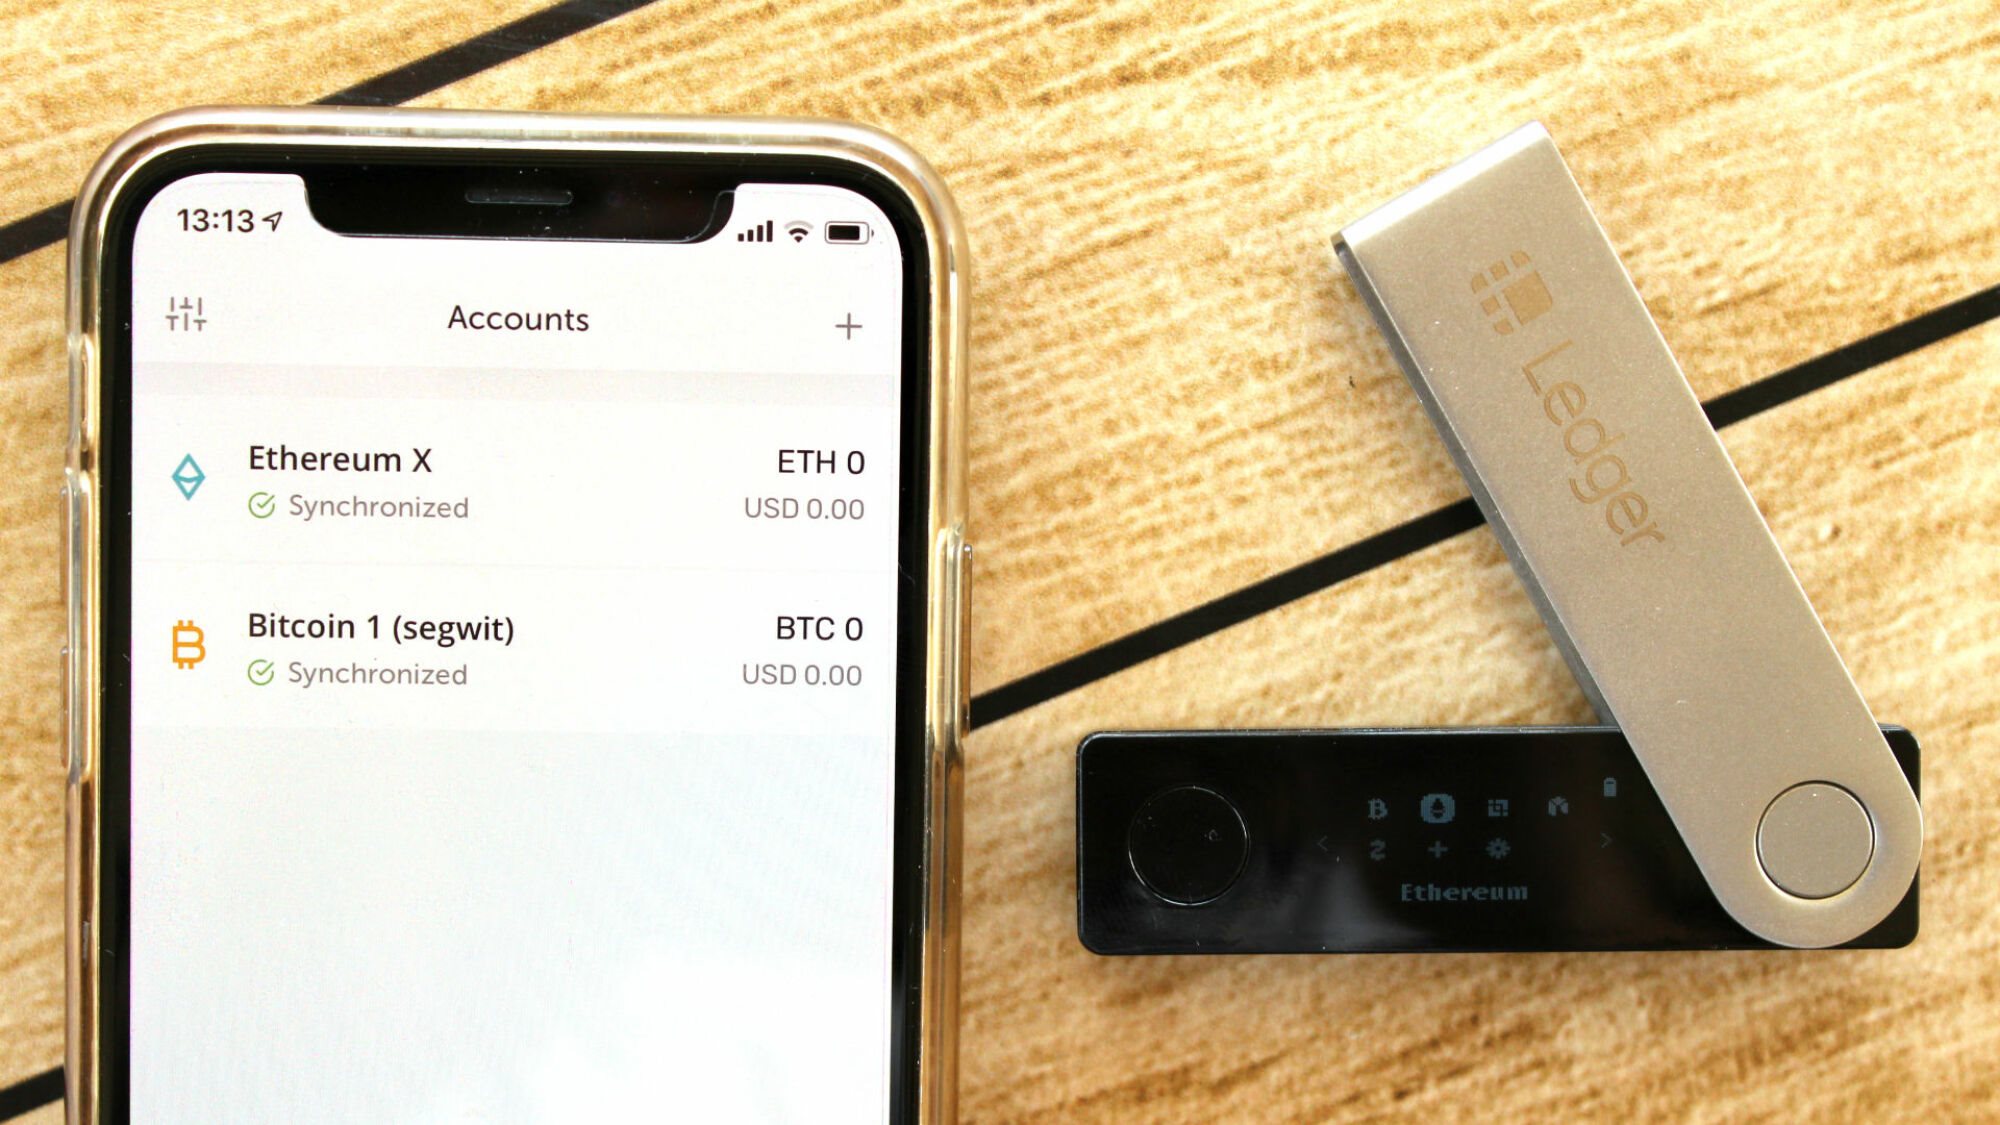 CONNECTING LEDGER NANO S PLUS TO IPHONE 15 AND ANDROID PHONE